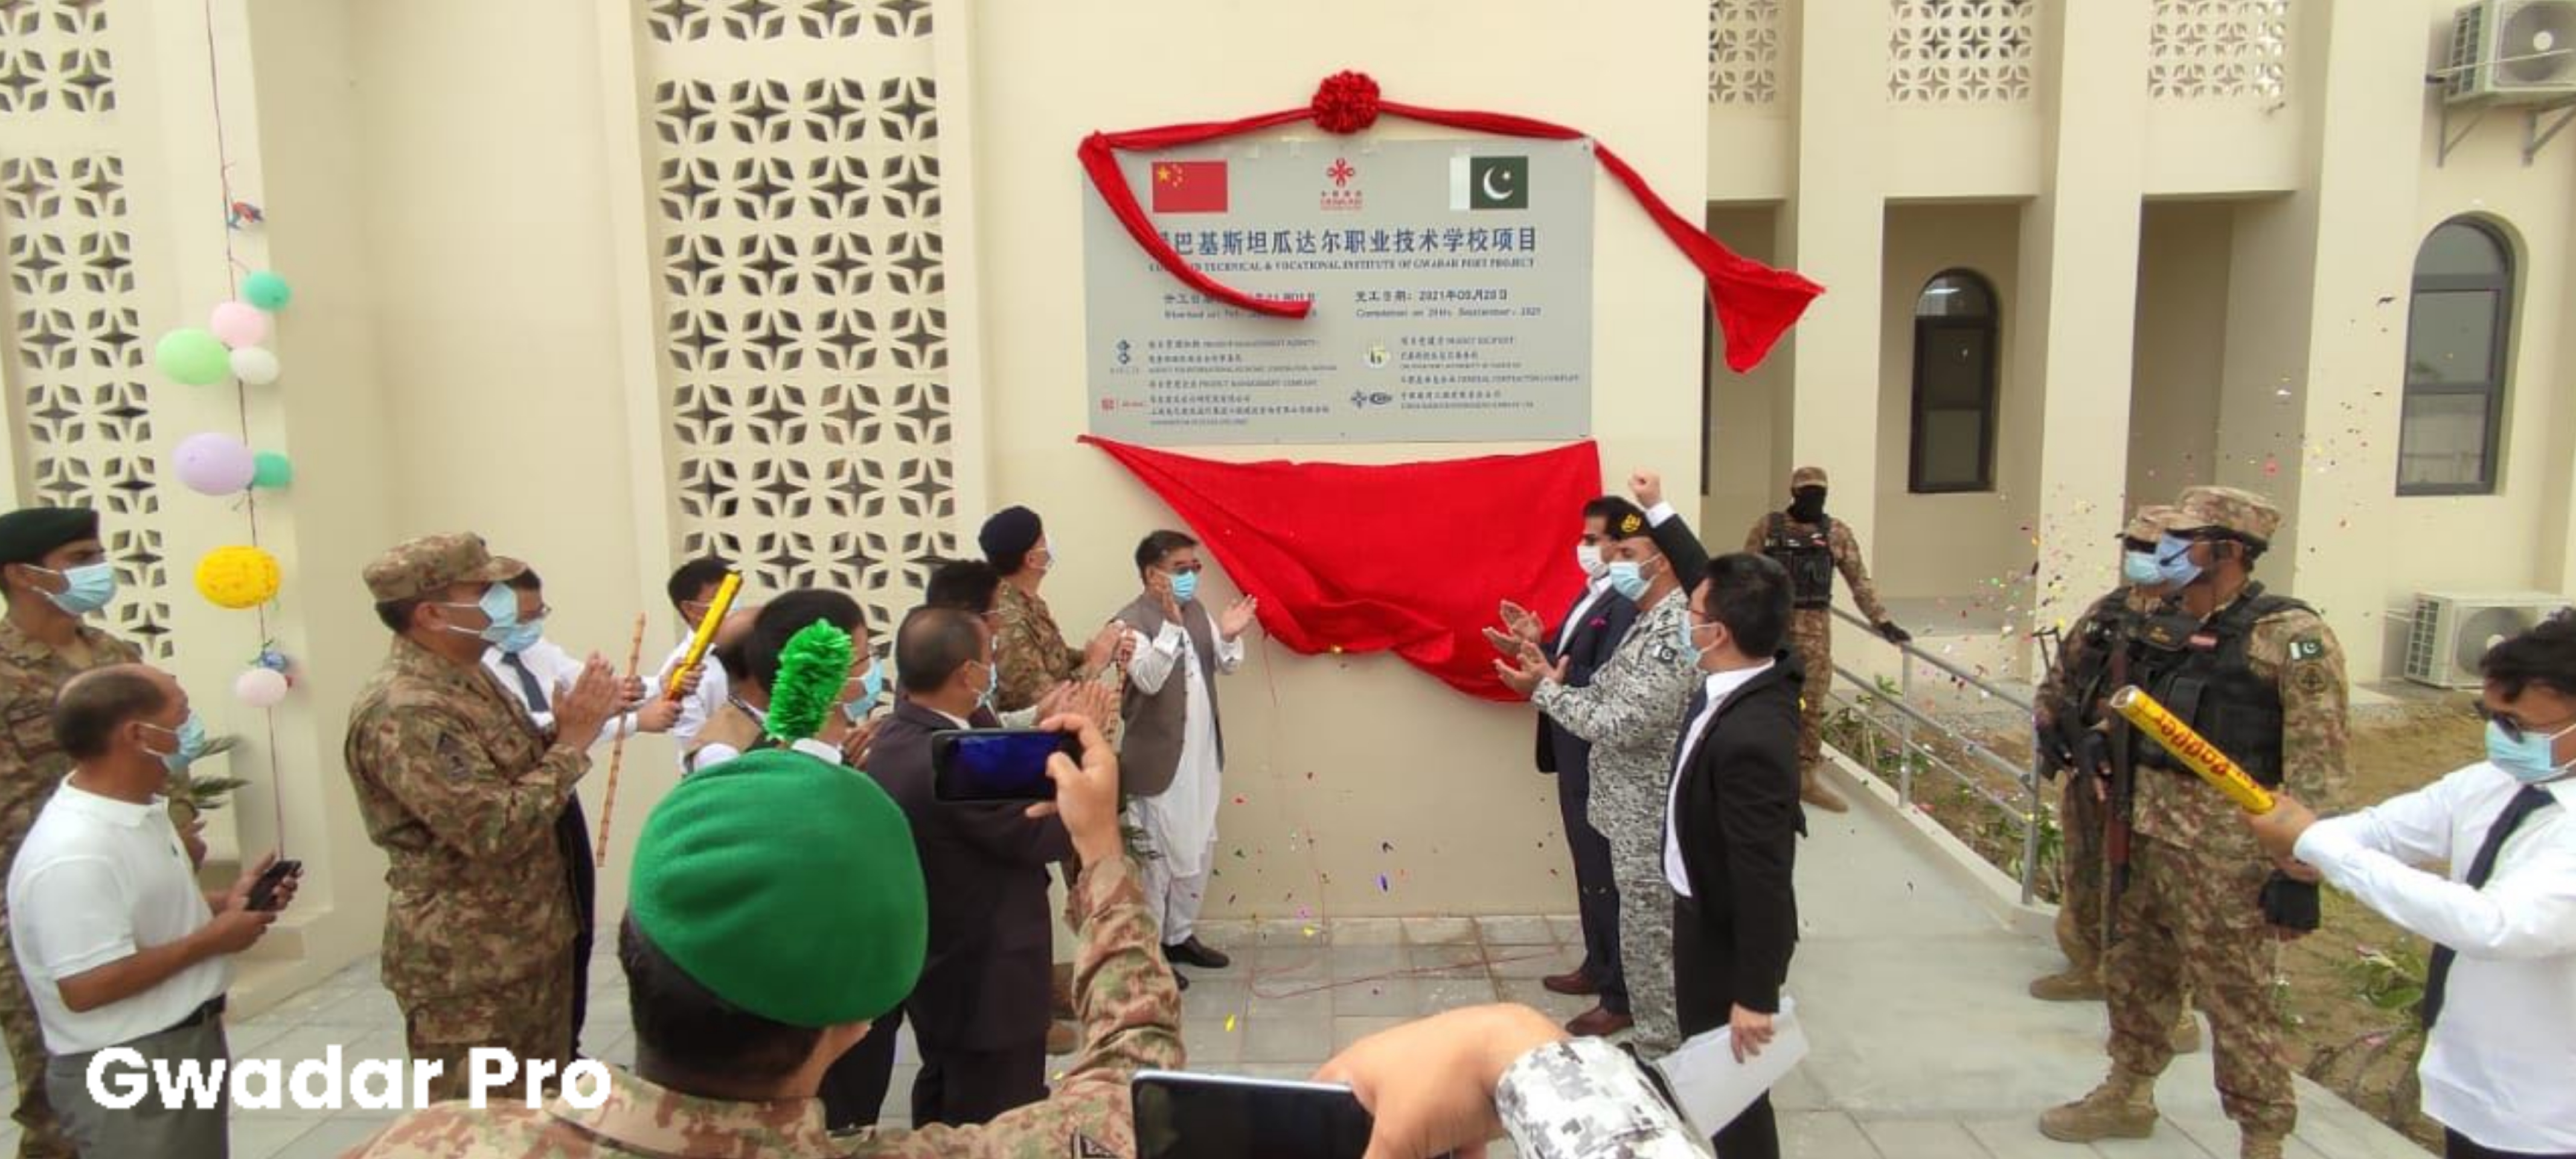 CPEC: China Aid Technical & Vocational Institute of Gwadar Port Project completed